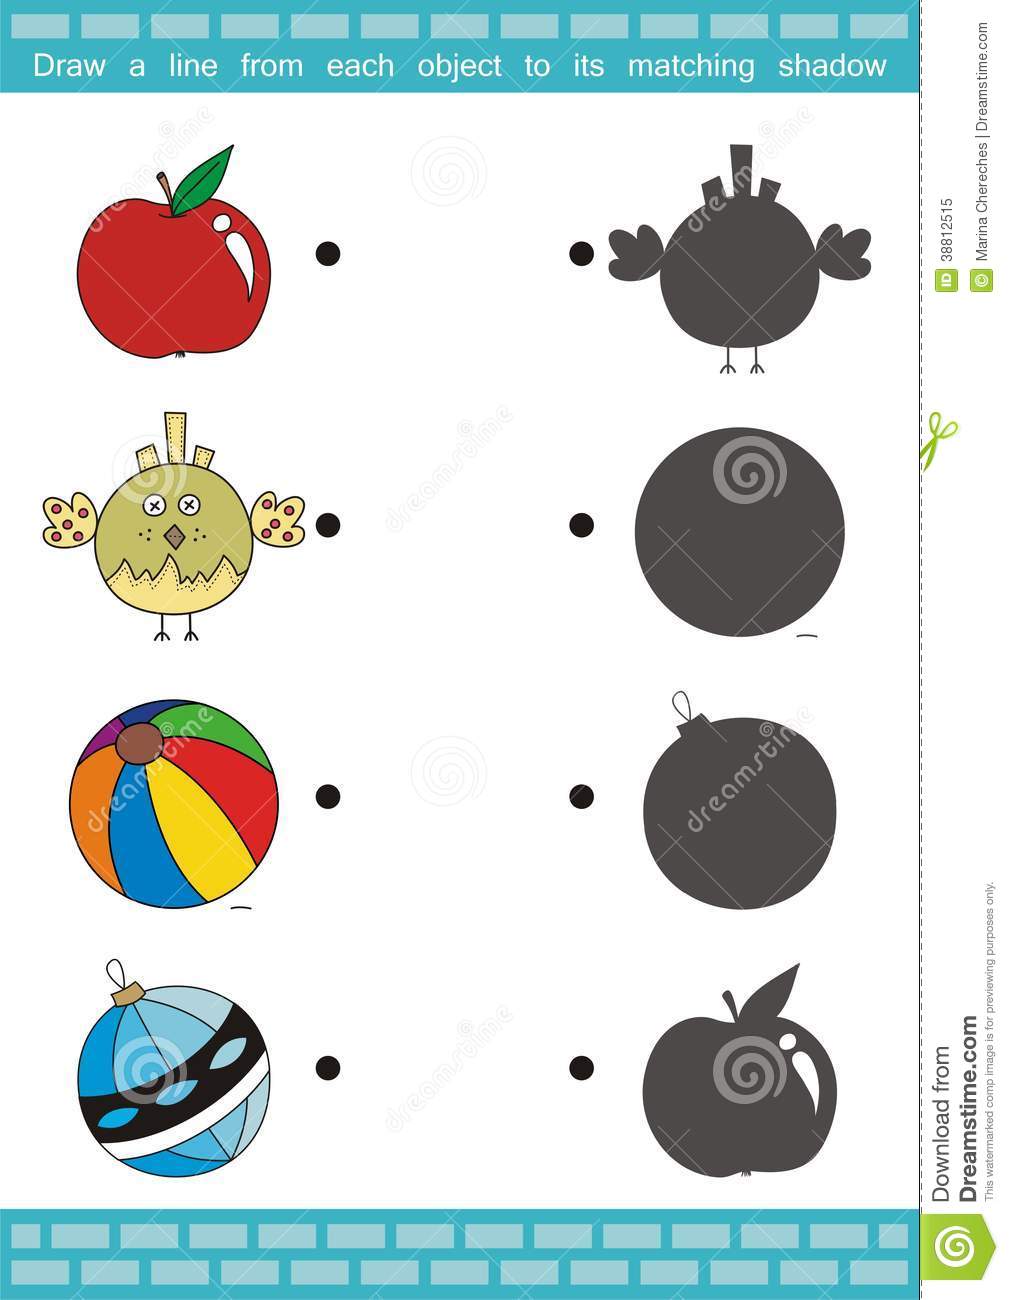 Shadow Matching Game  6  Stock Vector   Image  38812515